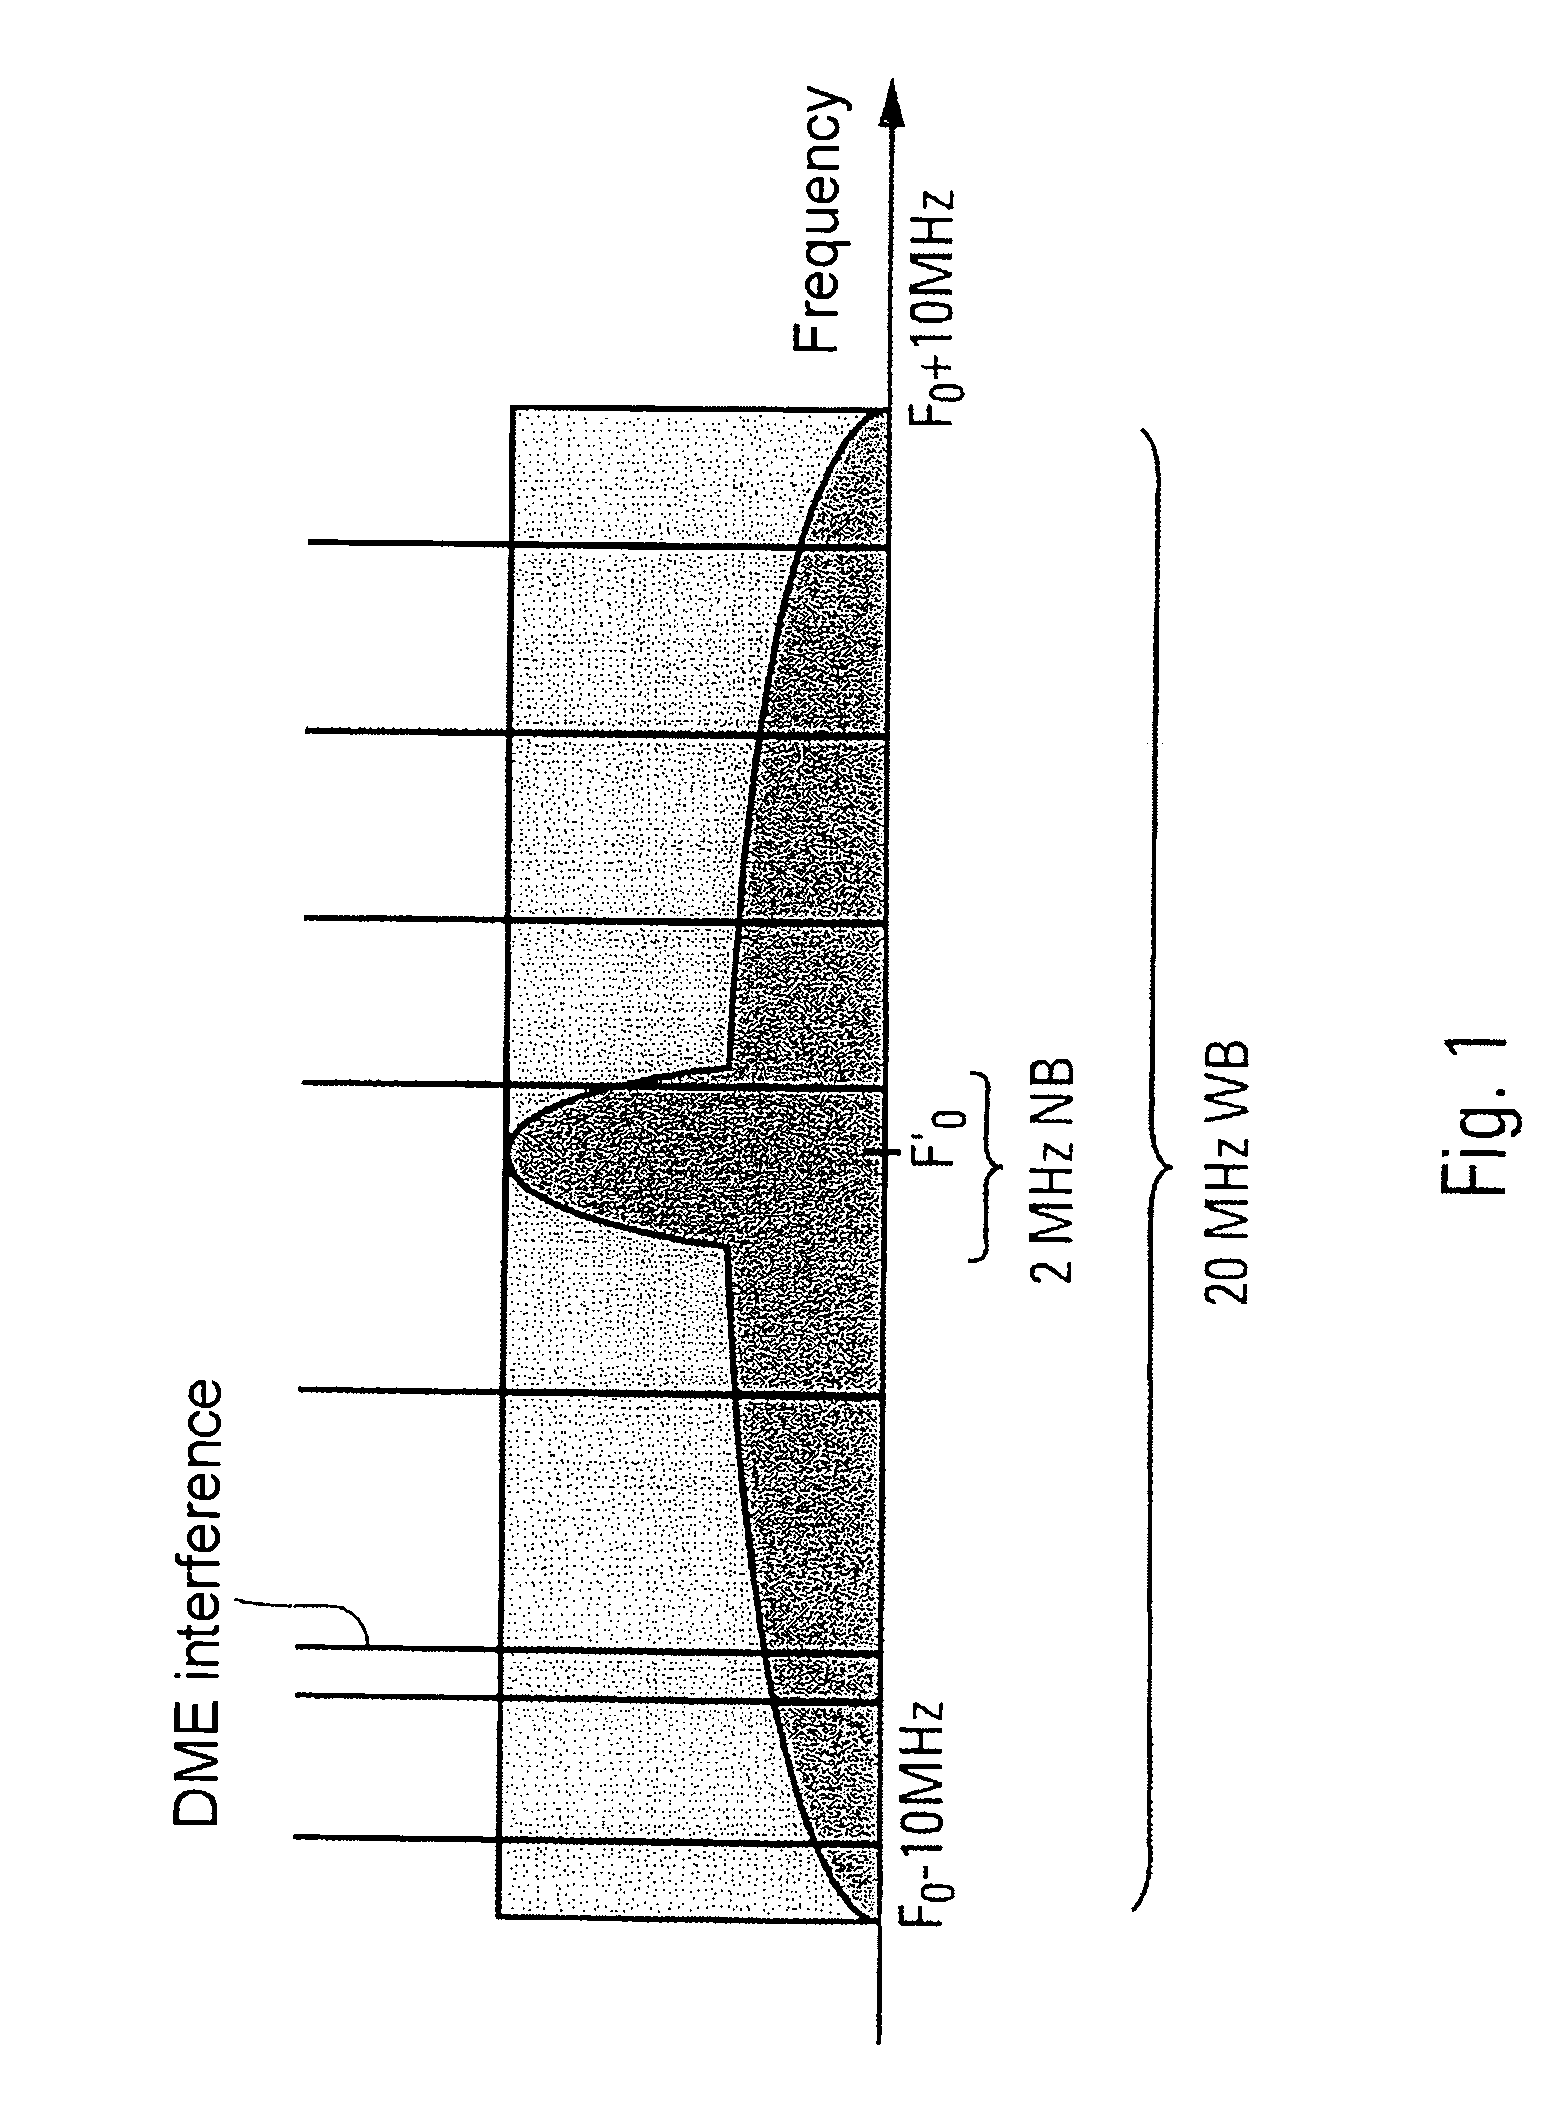 Method of signal processing in the presence of interference